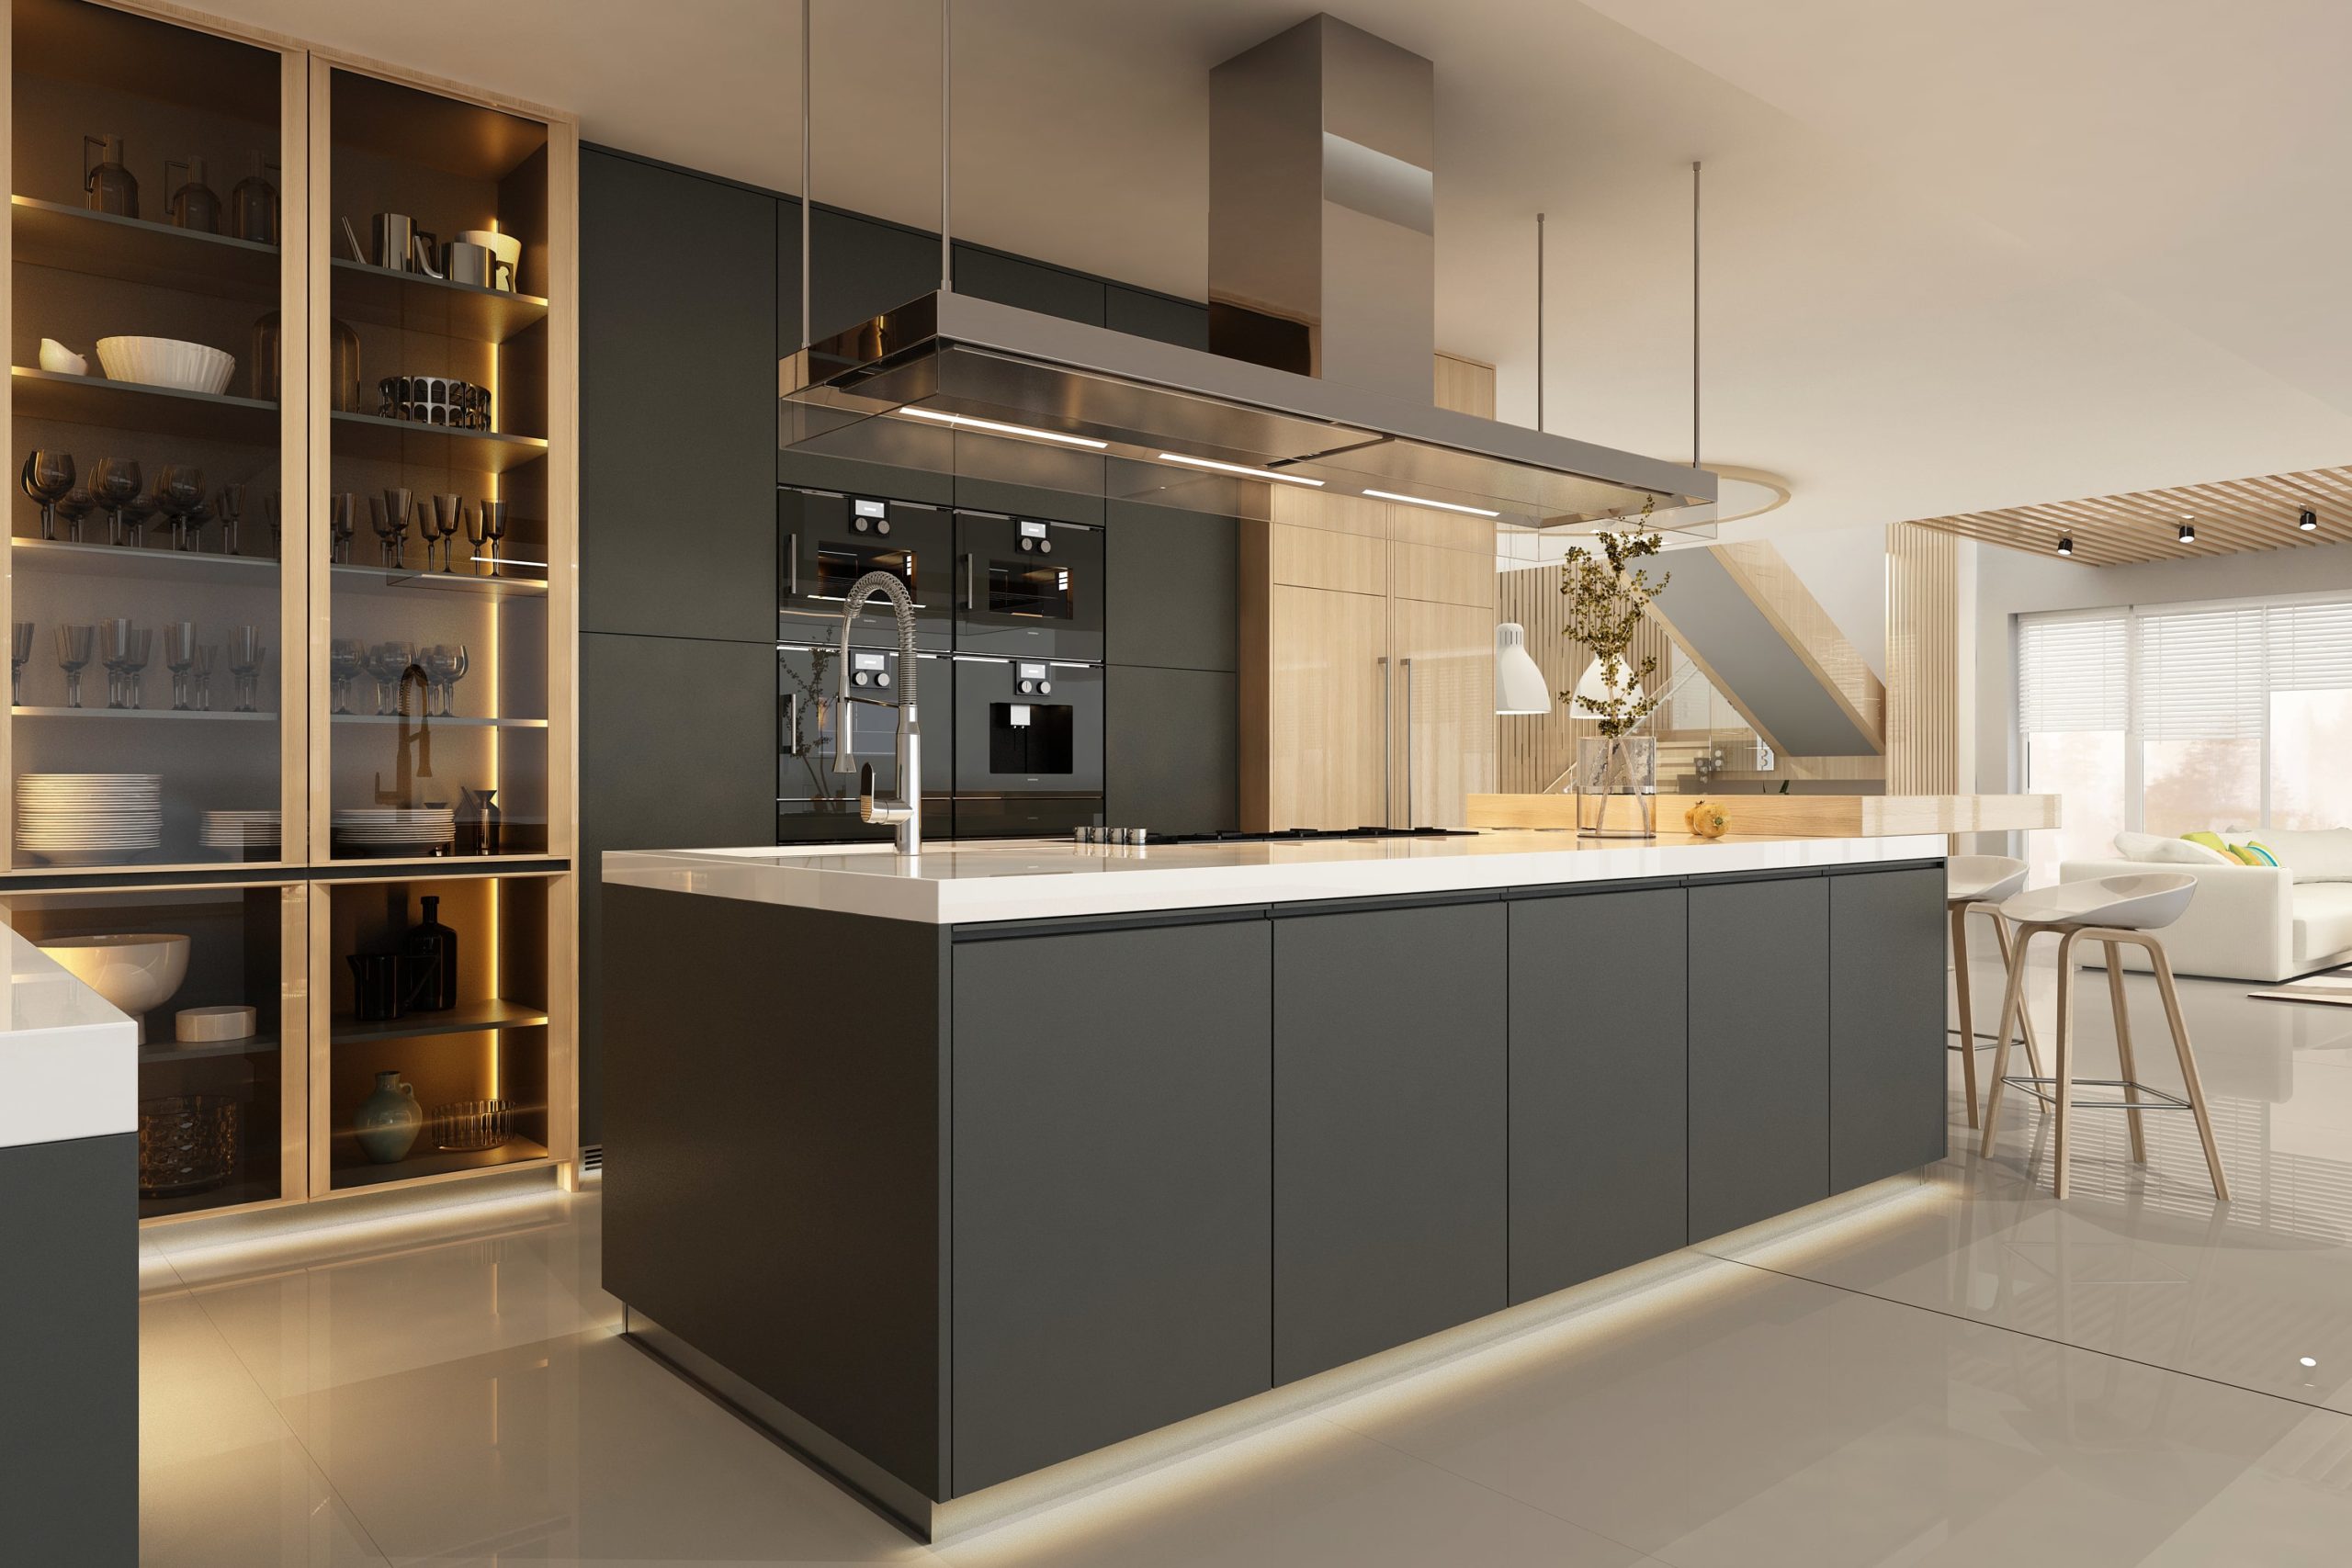 7 important tips that will help you design the kitchen of your dreams!